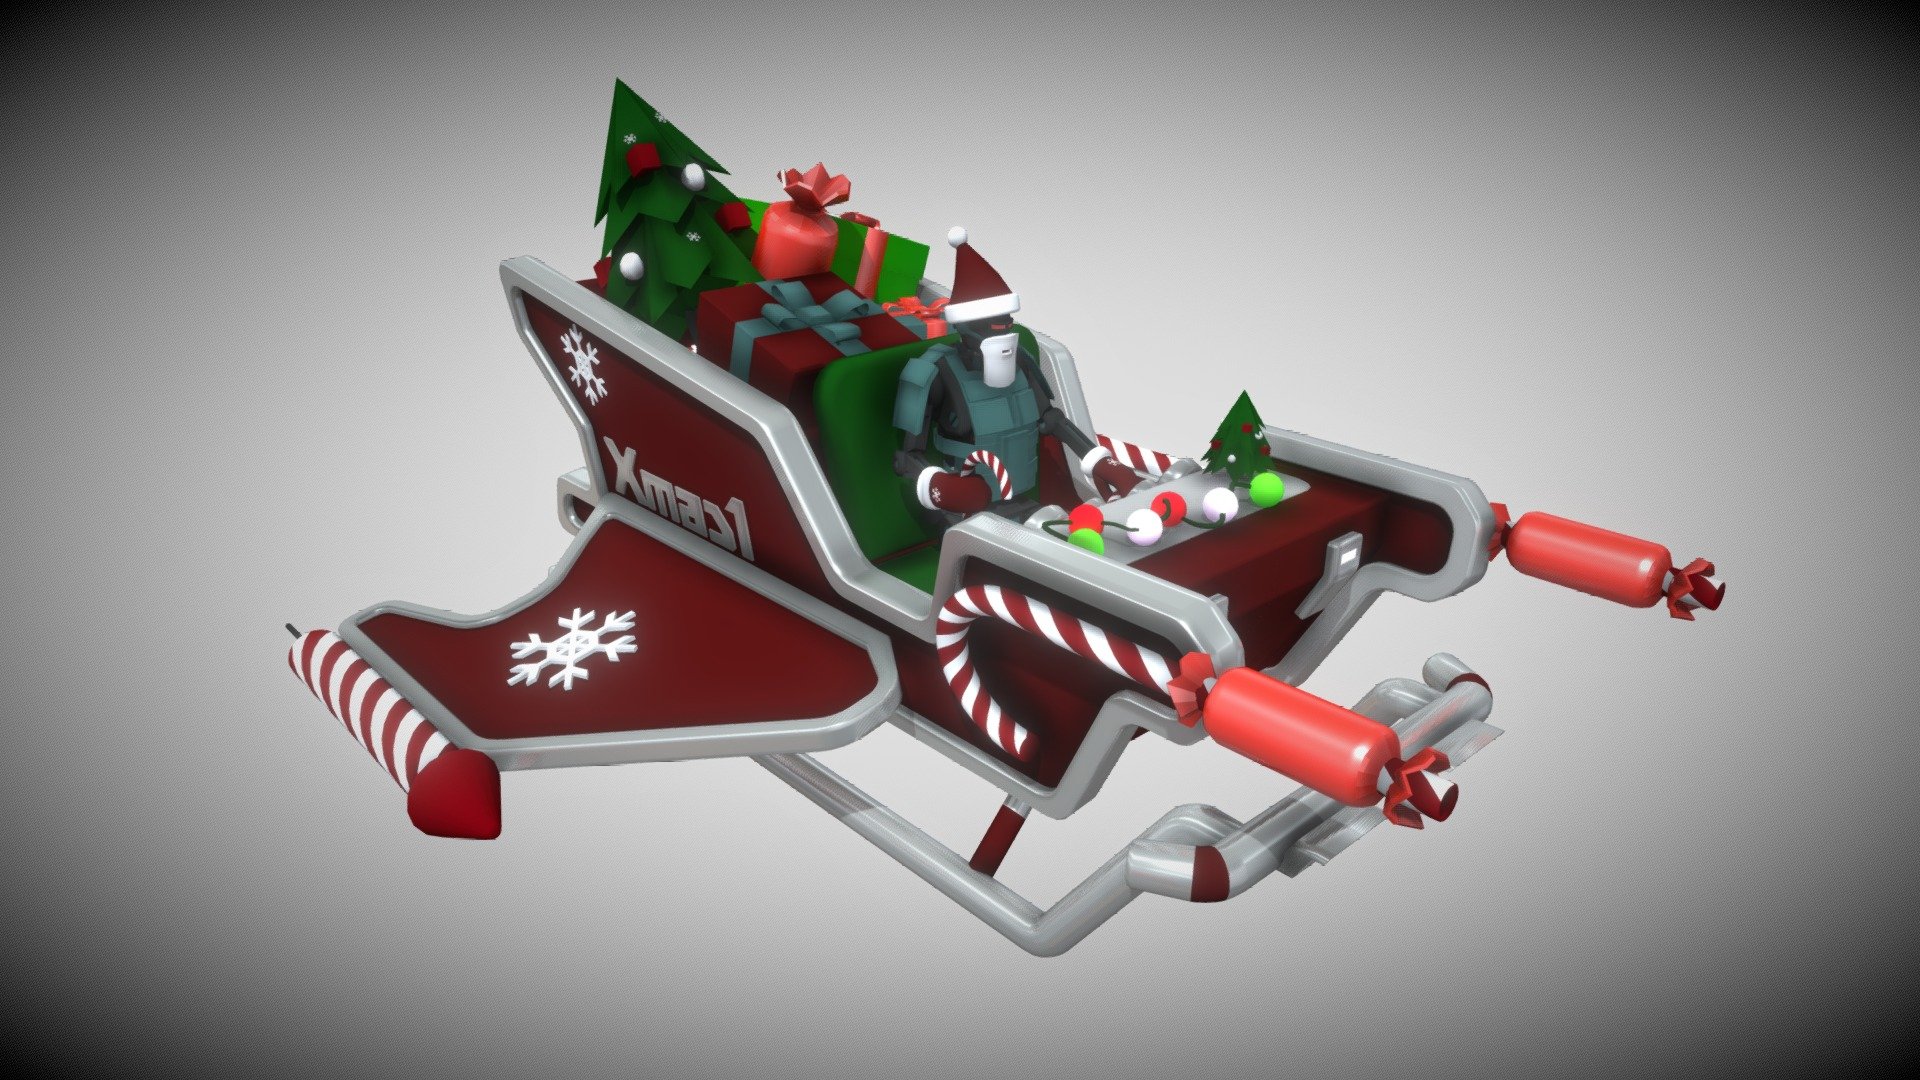 Ho, ho, ho&hellip; He knows you've been naughty! 
Game Ready model, orientation X-Forward, Z-up.
Included FBX file (one mesh) and BLEND file (separate objects in Blend file)
Please check my other places: ThunderOwl.One - Xmas Robo Santa Sleigh - Buy Royalty Free 3D model by Thunder_Owl 3d model